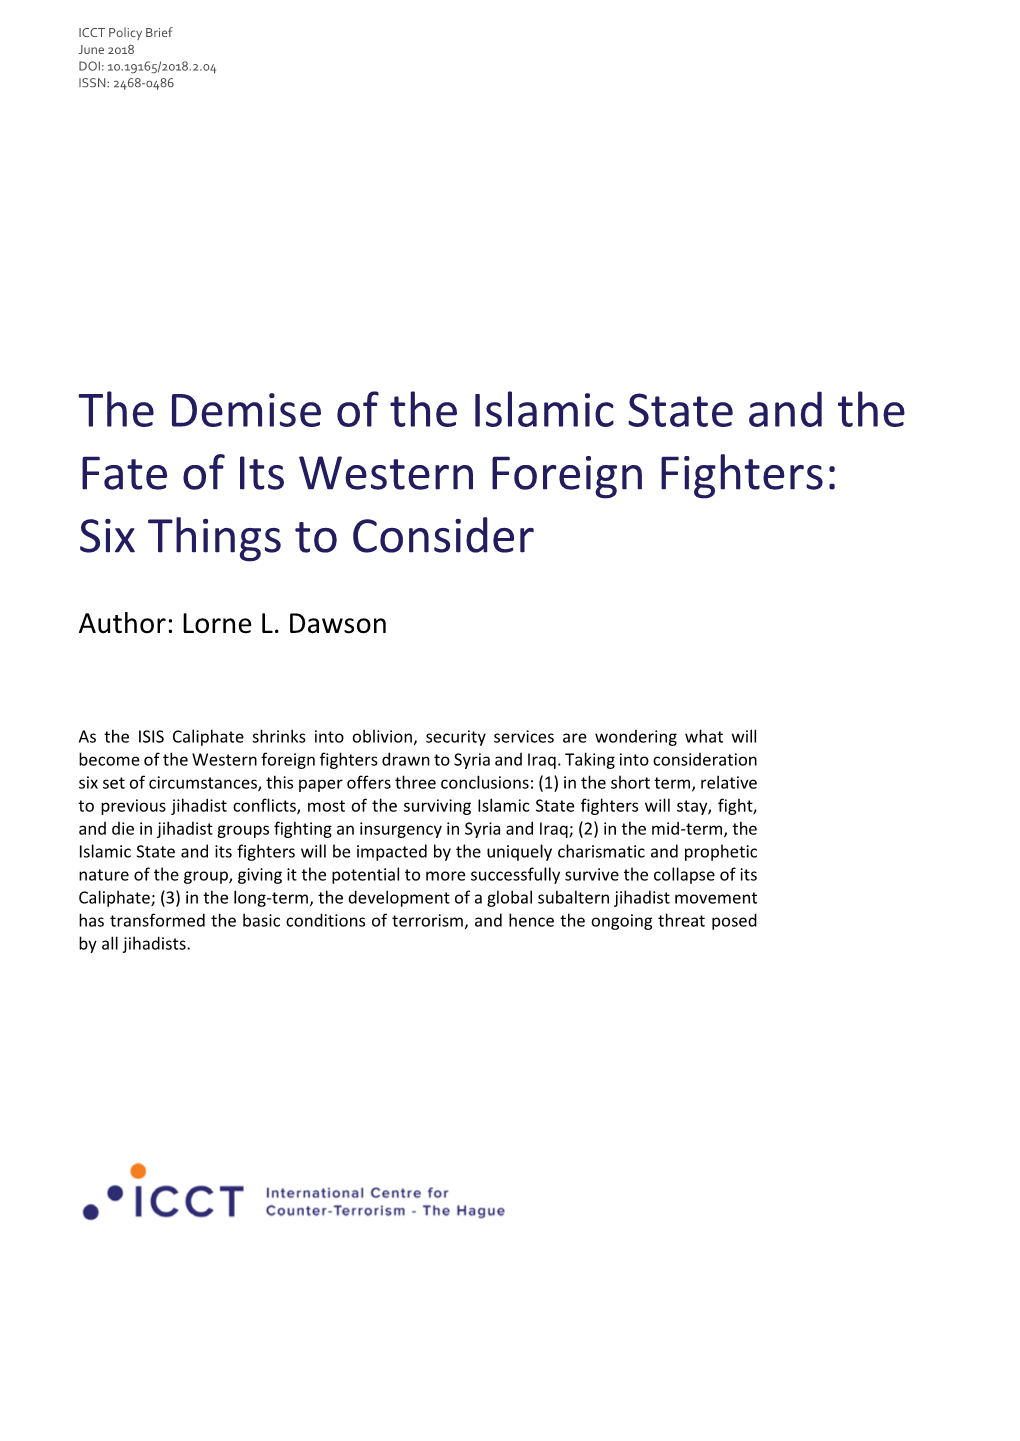 The Demise of the Islamic State and the Fate of Its Western Foreign Fighters: Six Things to Consider